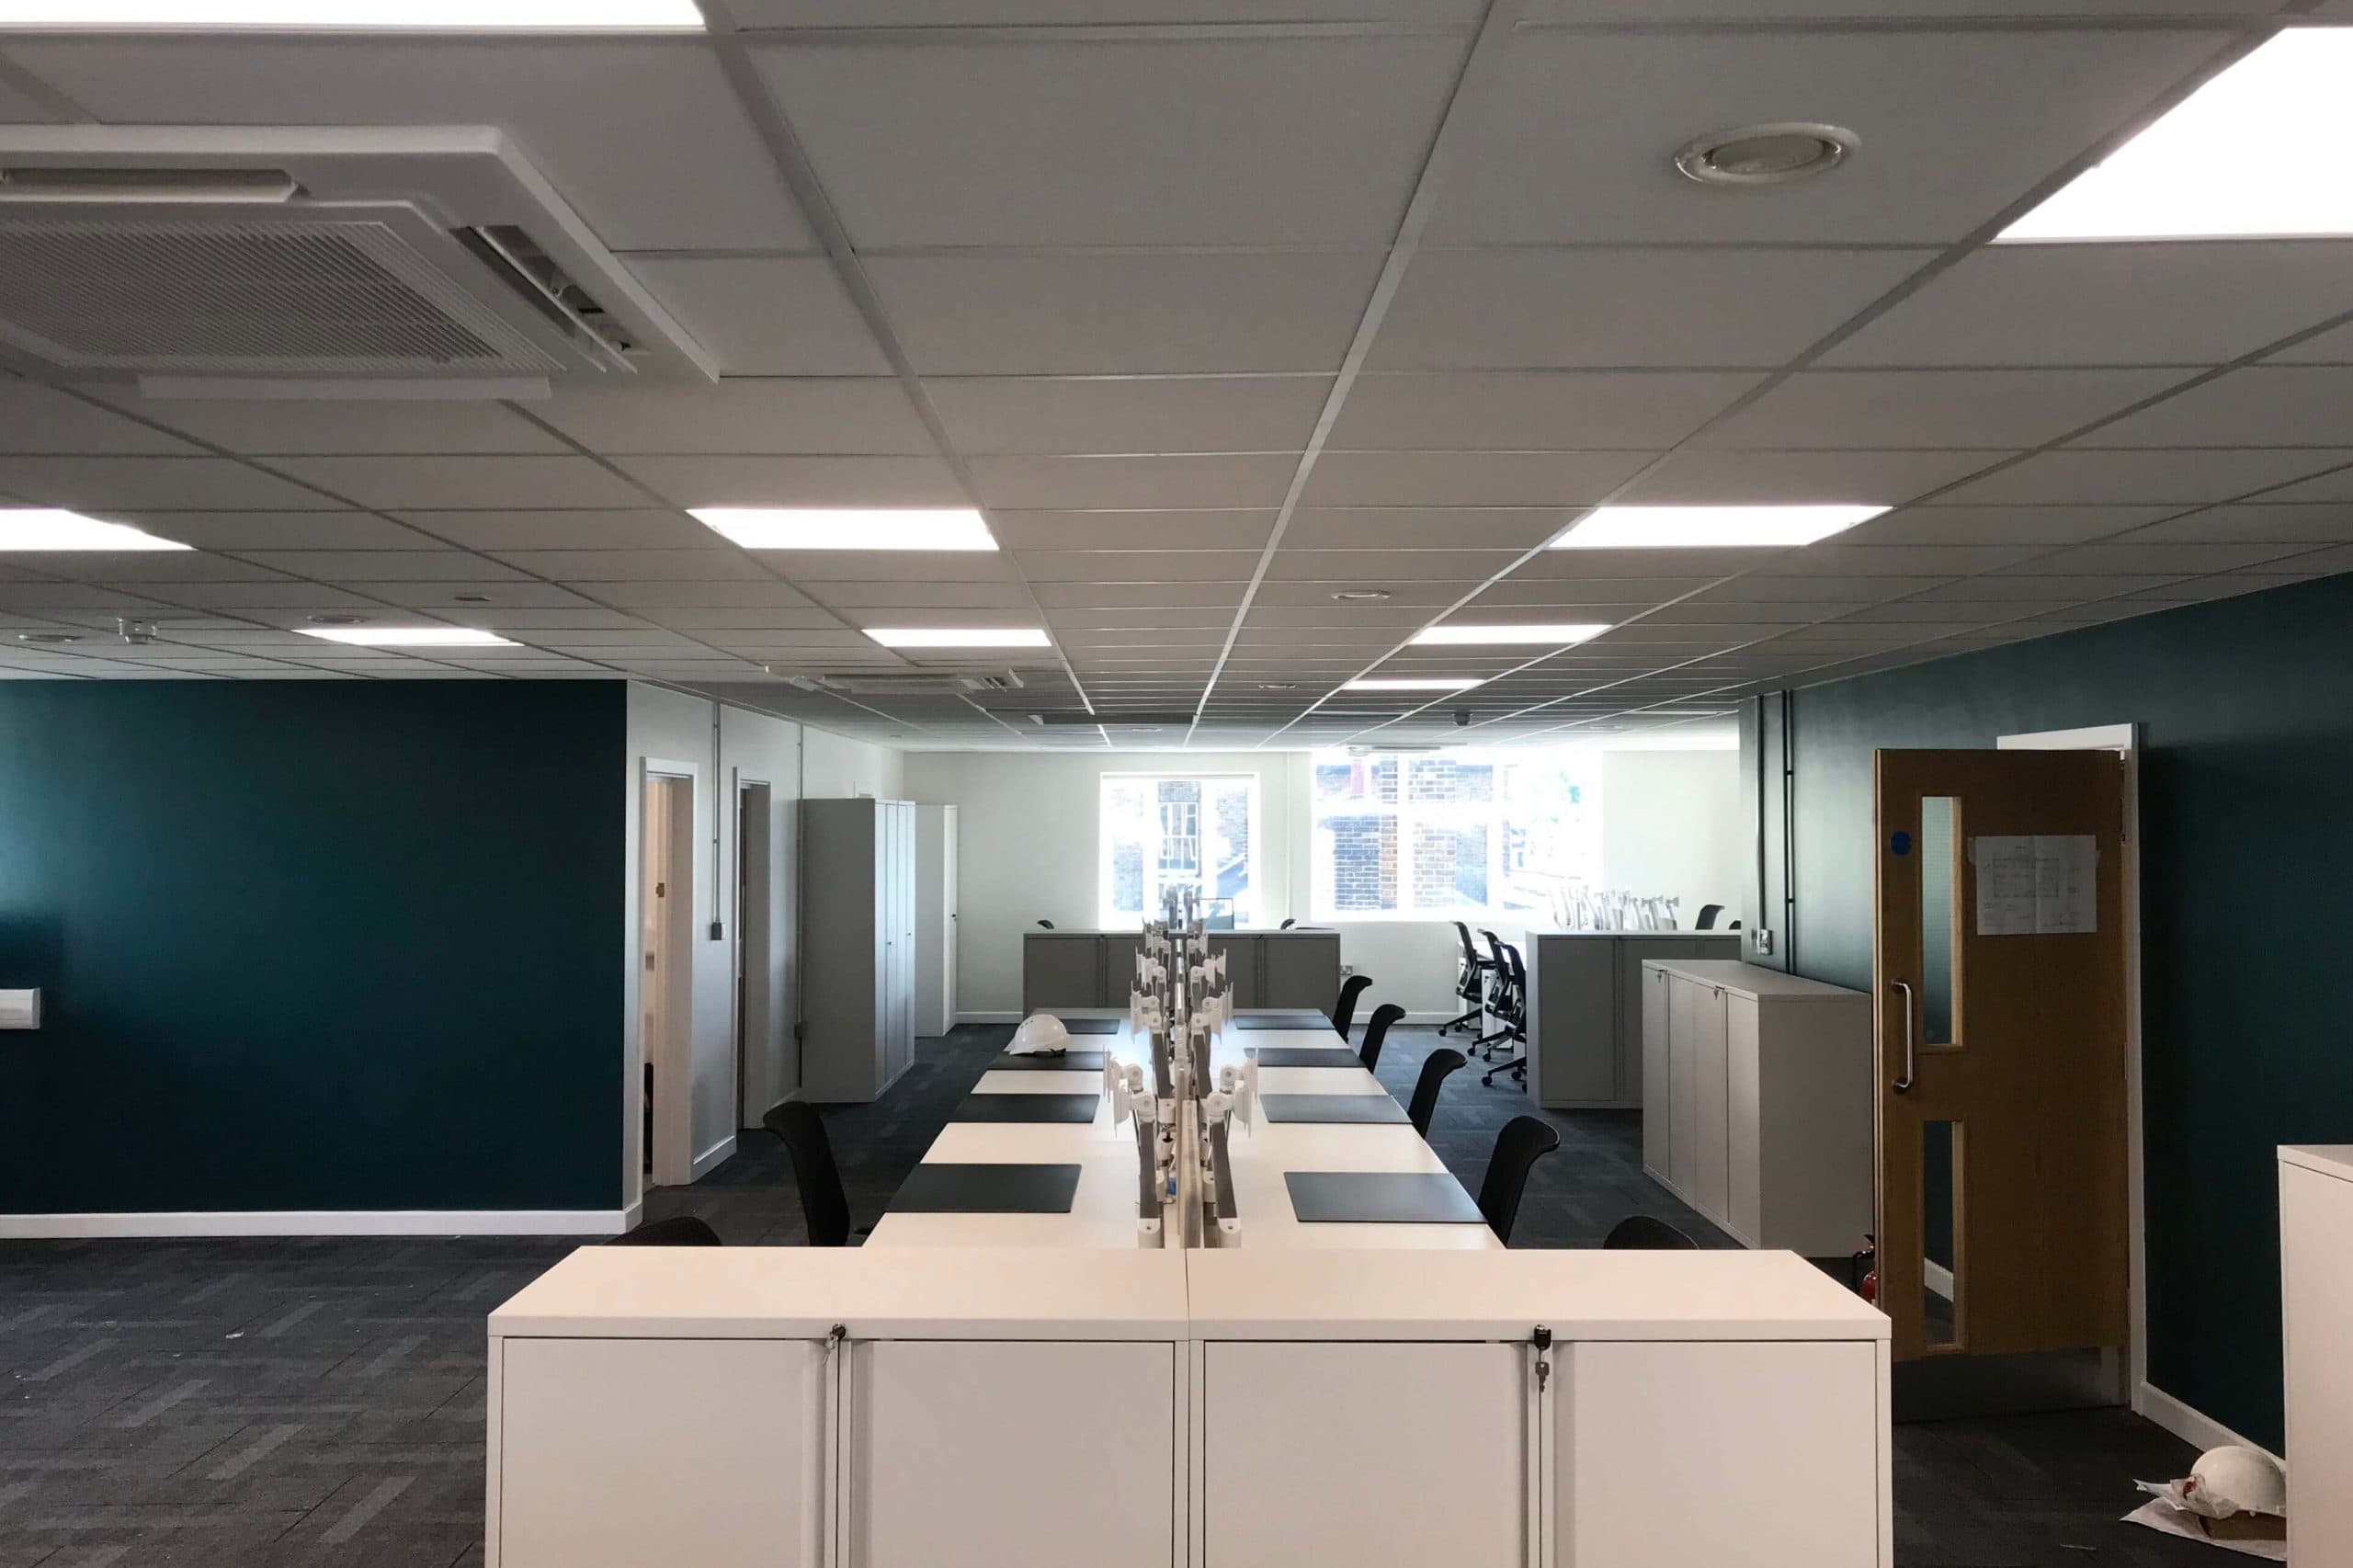 Norwood junction large commercial air conditioning solution by SubCool FM white cassette units in ceiling of office desk space